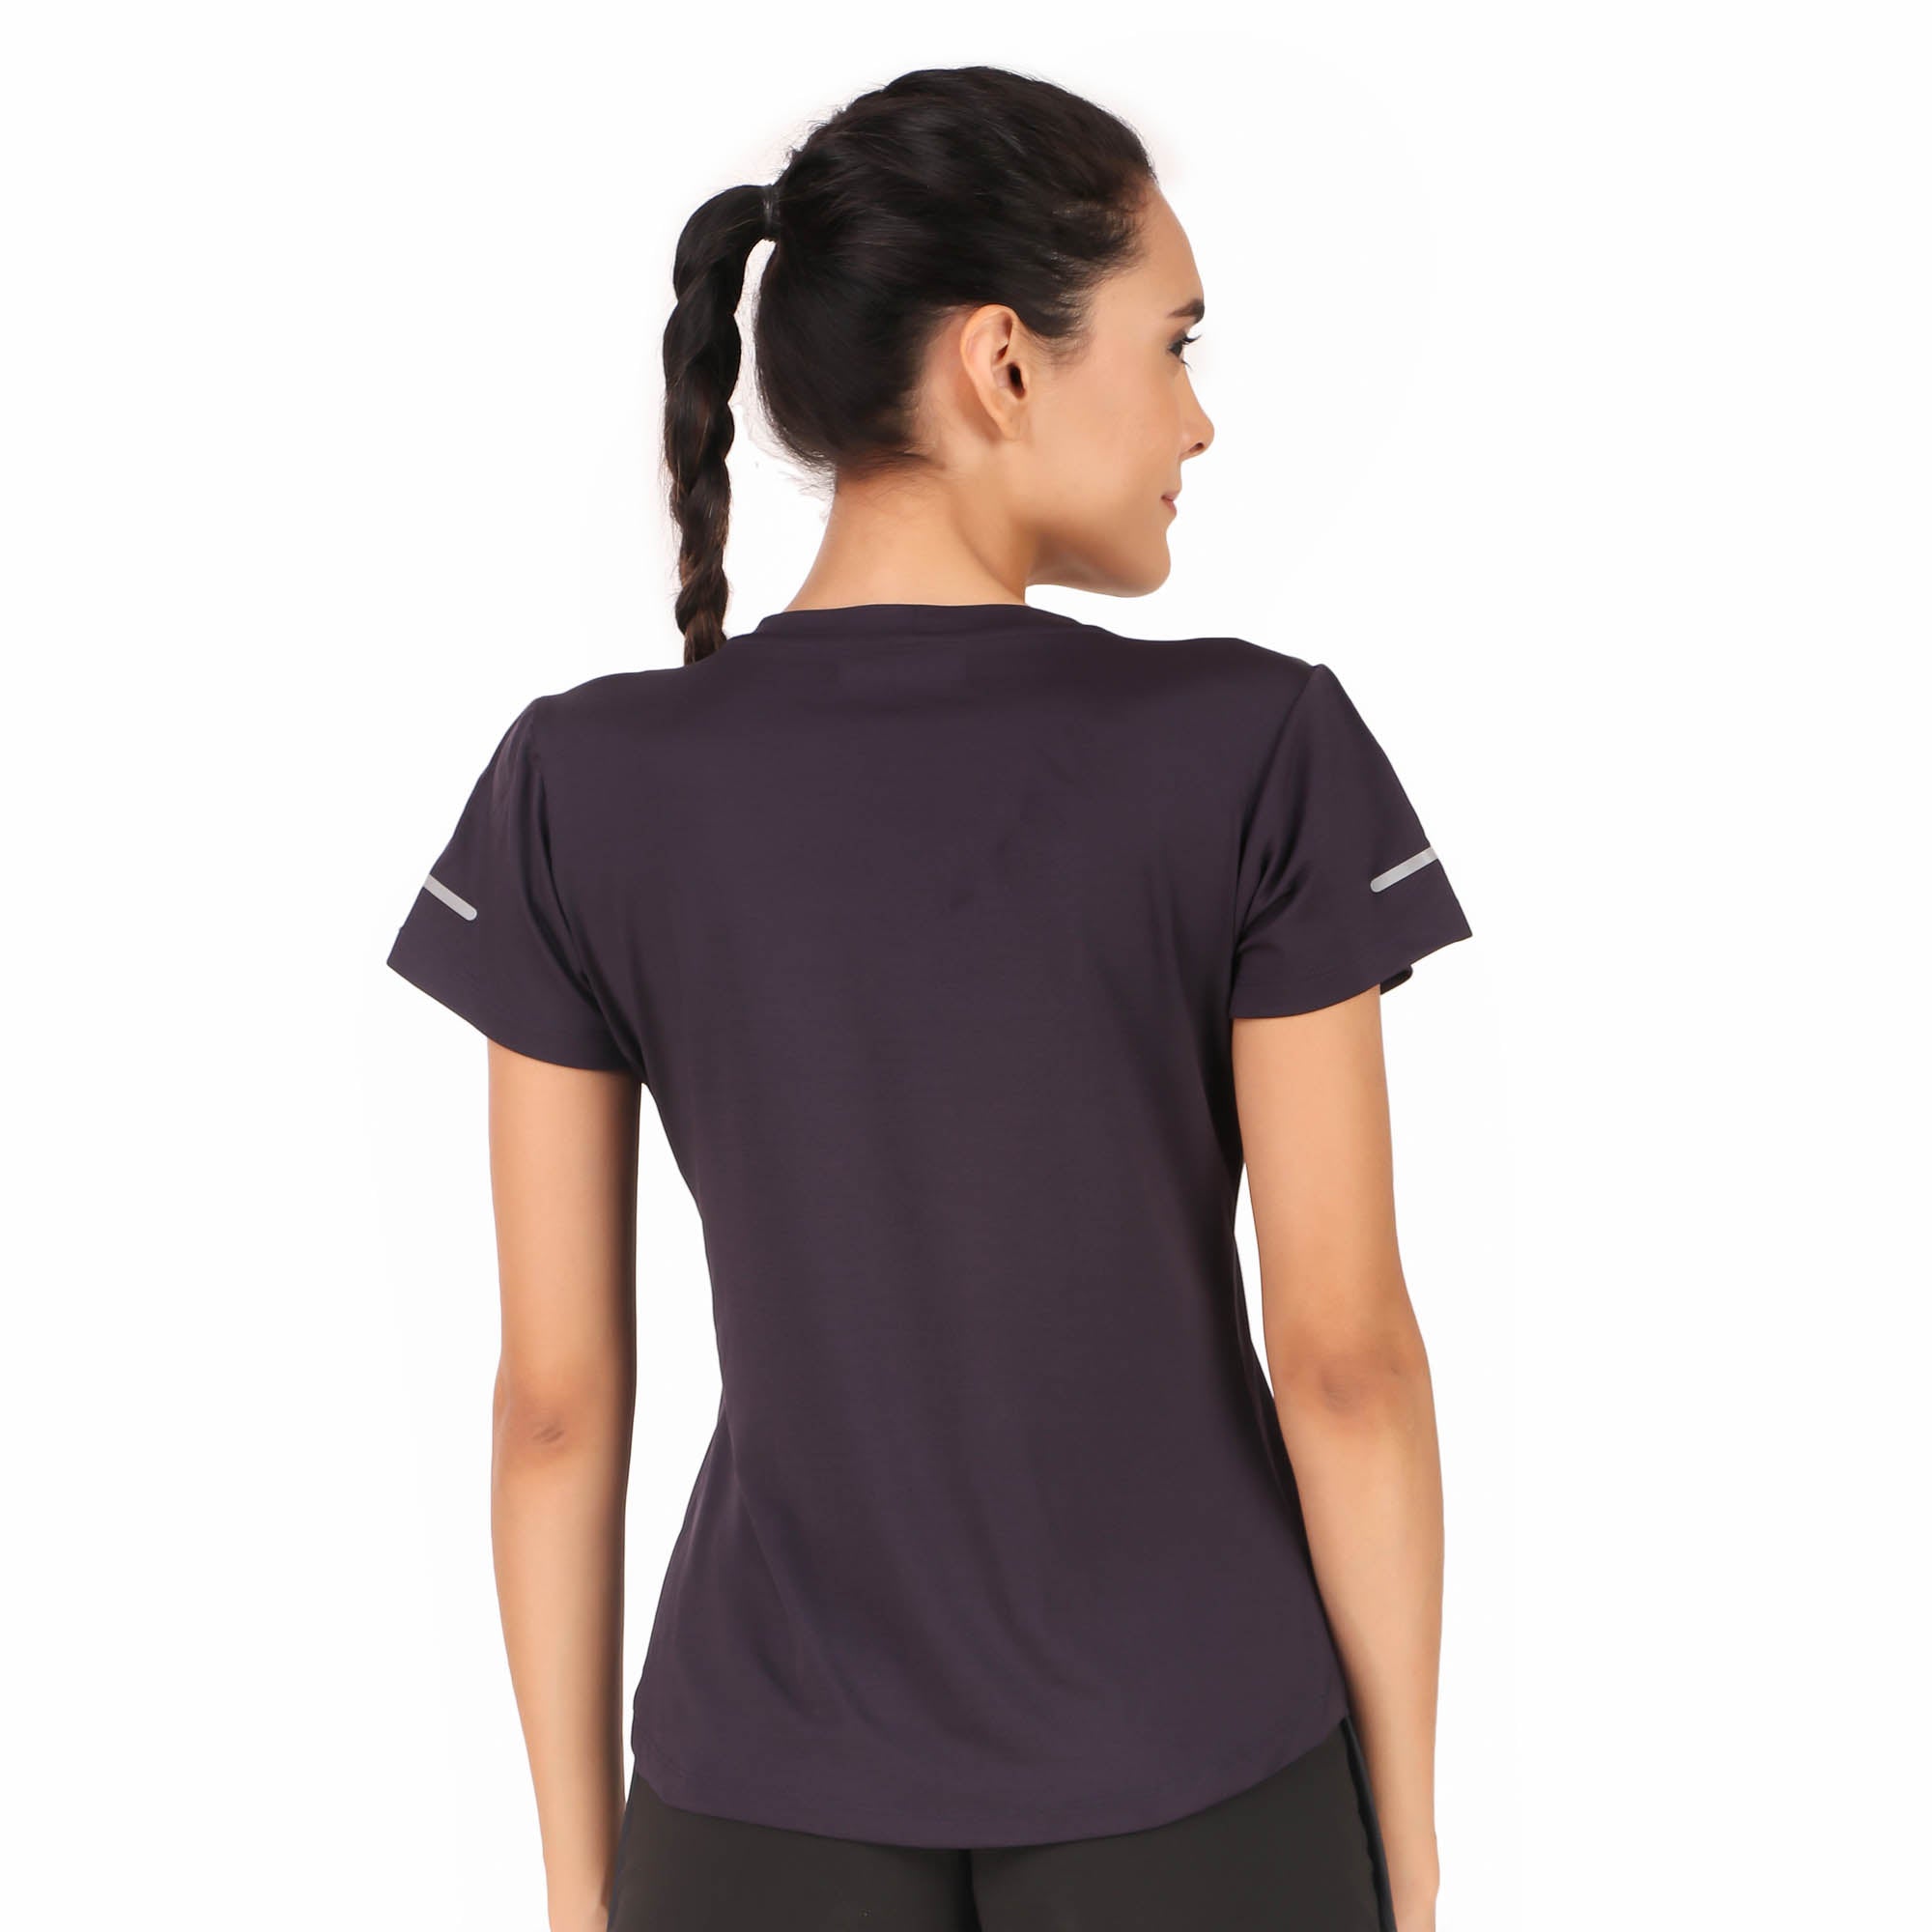 Multiverse Performance Tshirt For Women (Space Blue)